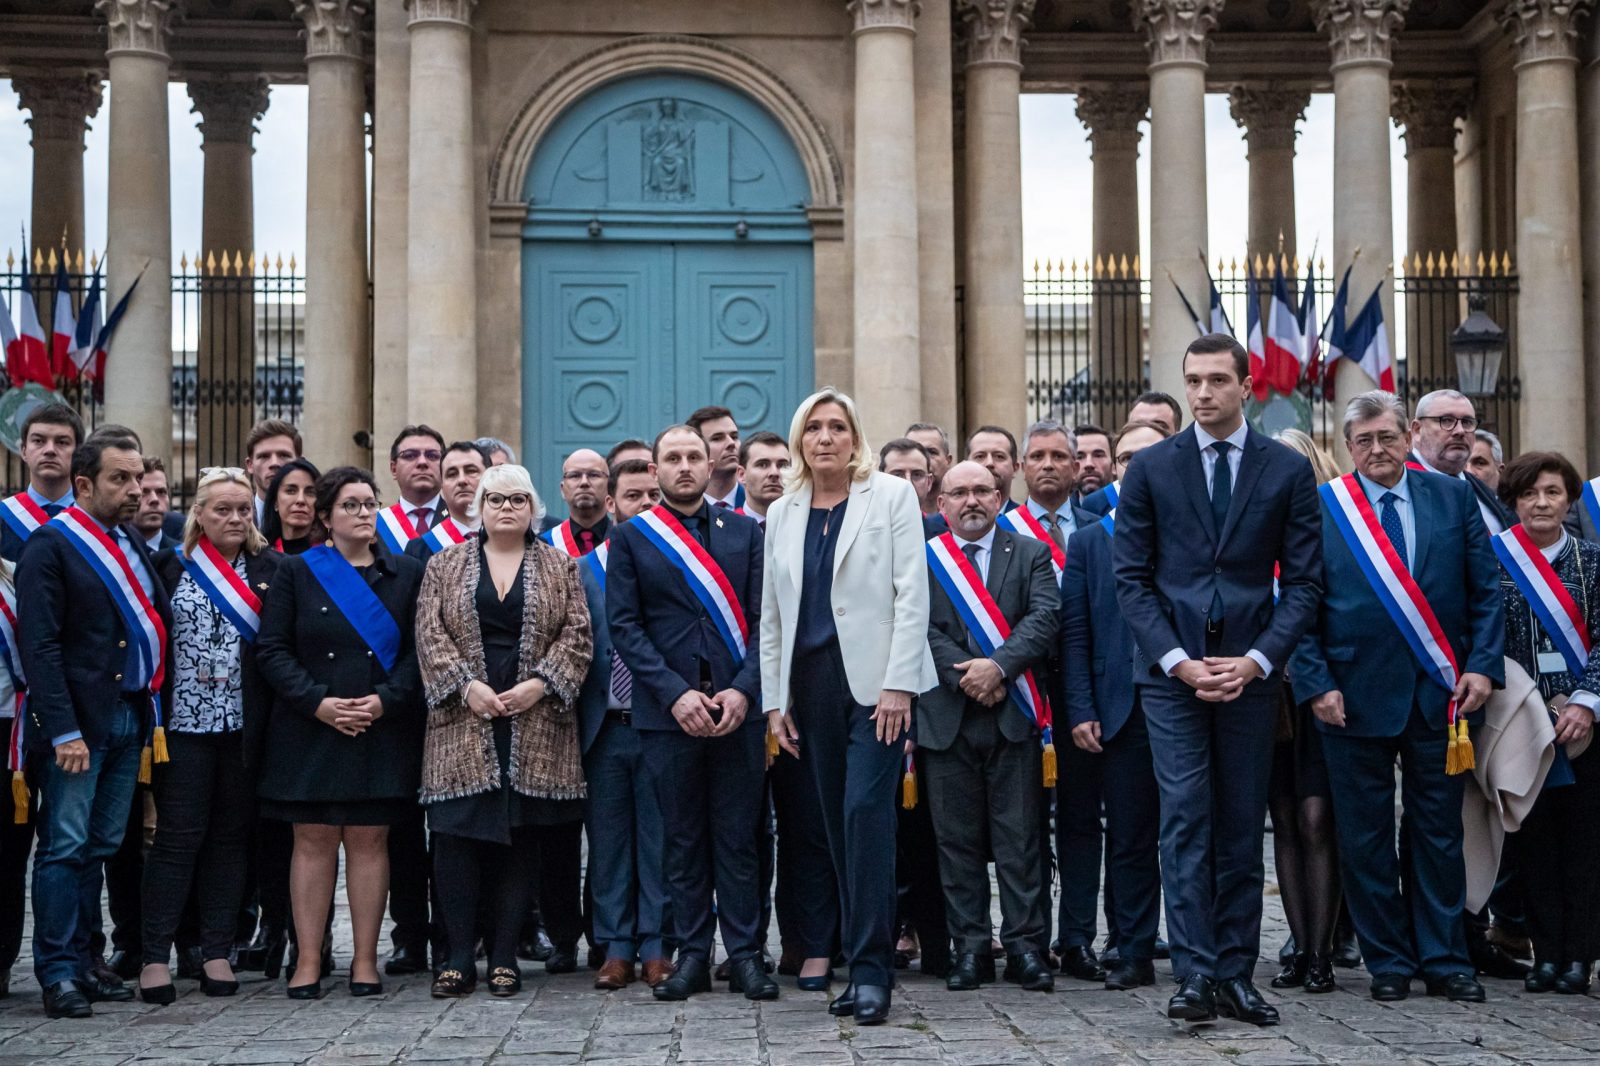 epa10255208 French far-right party Rassemblement National (RN) leader and Member of Parliament Marine Le Pen (C) and European Parliament member Jordan Bardella (C-R) flanked by RN’s Mps gather in front of the National Assembly to observe a minute of silence for Lola,  a young girl murdered in a northern district of French capital, in Paris, France, 20 October 2022. Lola, aged 12, was found dead in a trunk near the building where her parents are caretakers. Her death has sparked a political controversy over immigration as an Algerian woman has been arrested and is suspected of being the perpetrator.  EPA/CHRISTOPHE PETIT TESSON